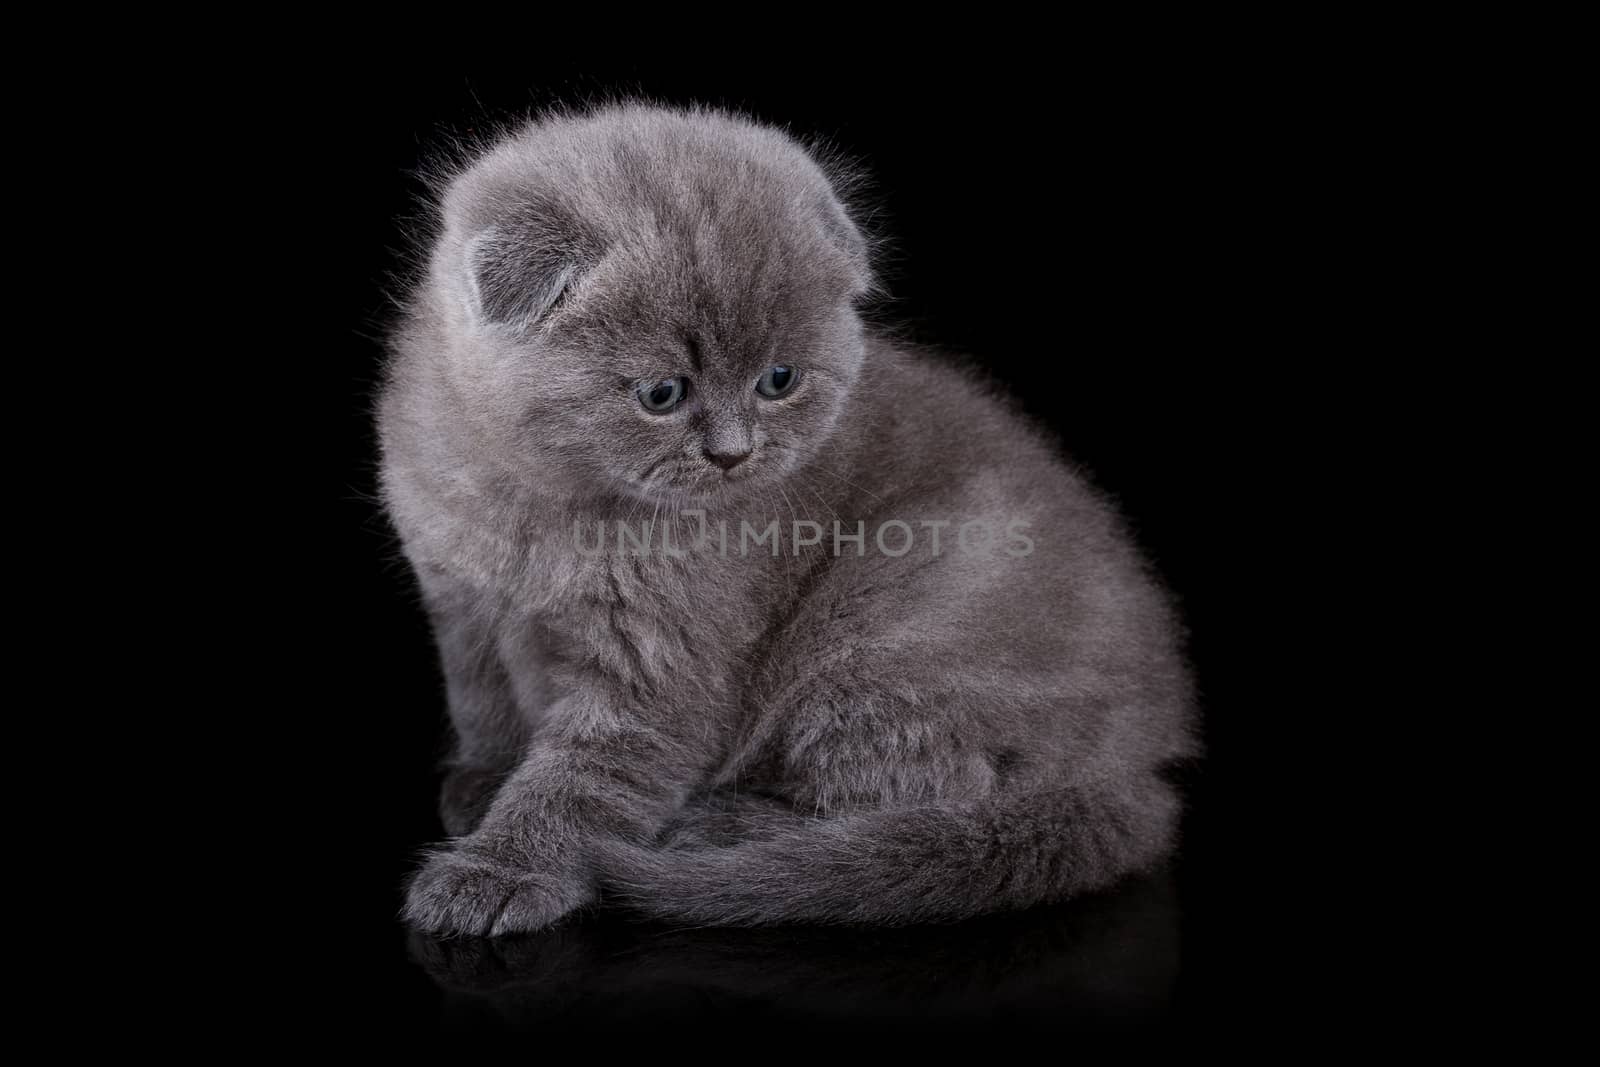 Lop-eared kitten on a magnificent black background.